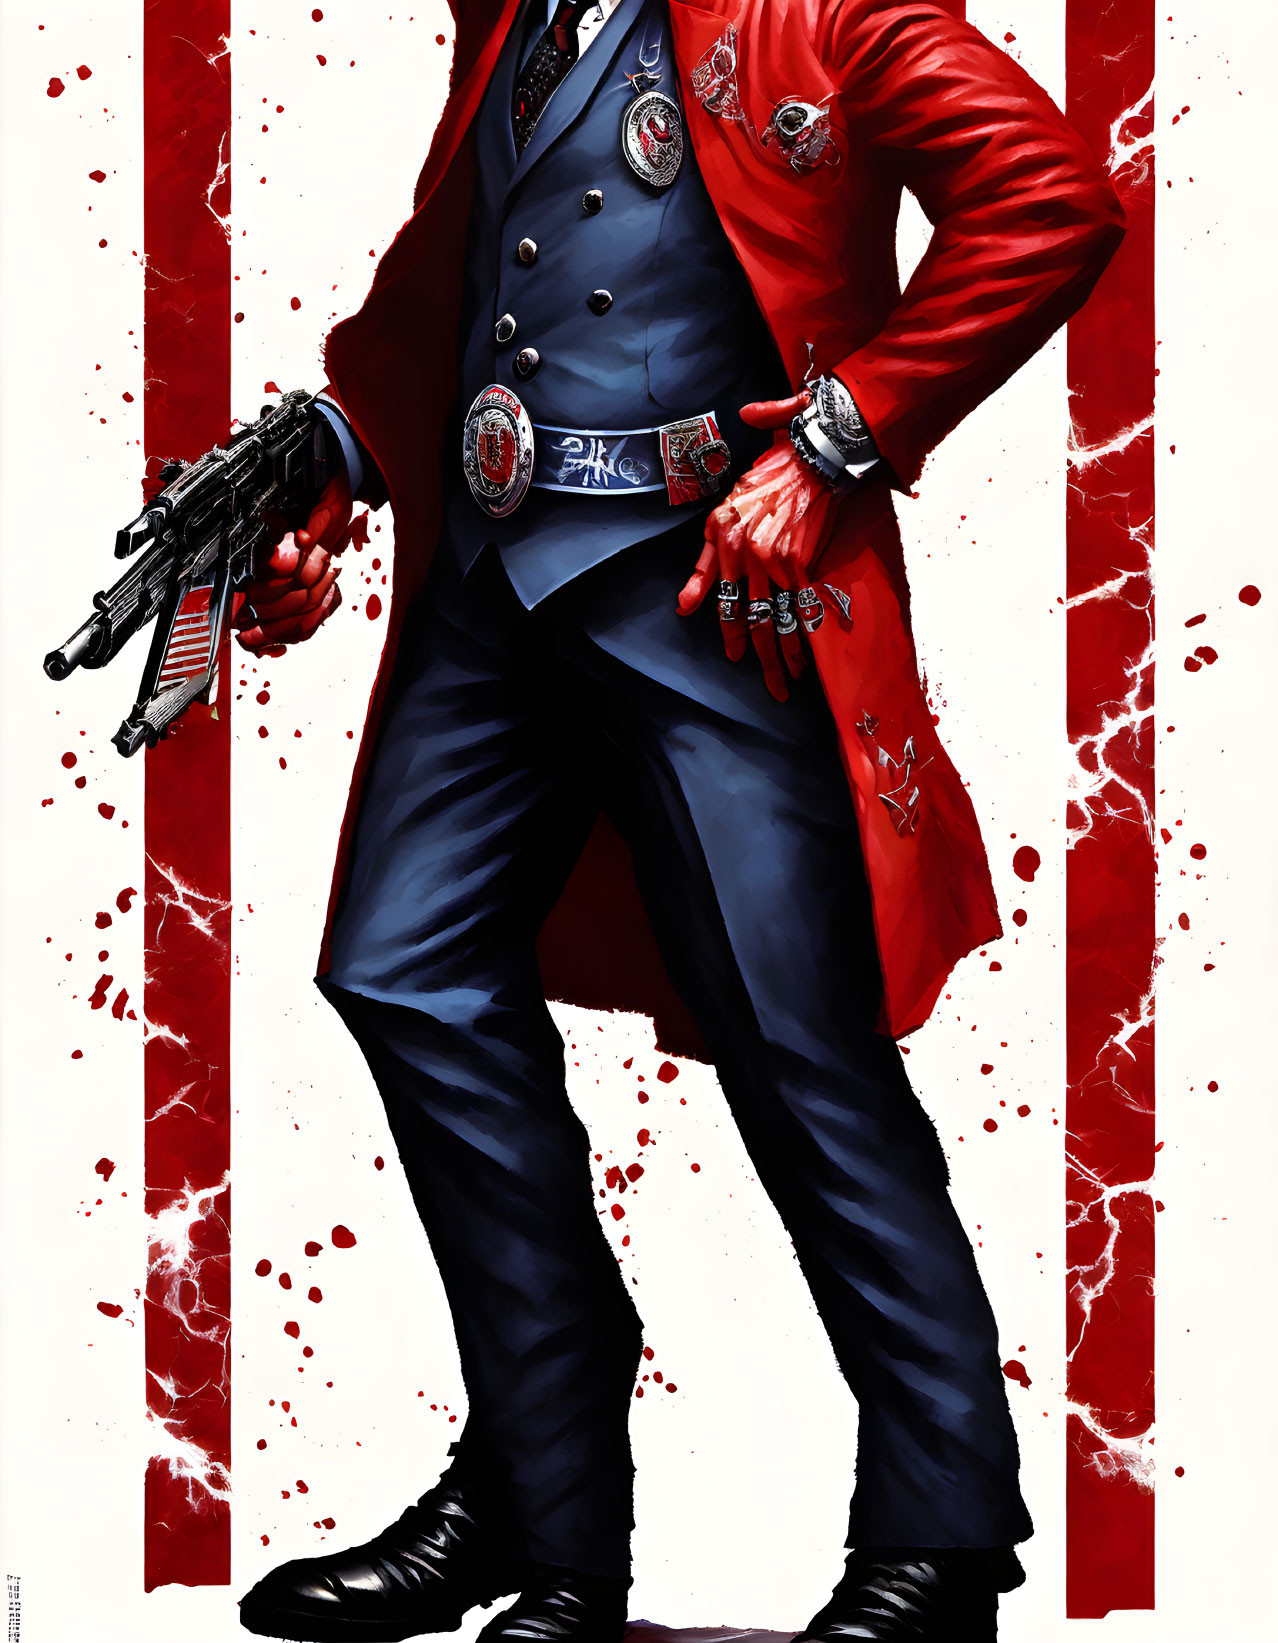 Illustration of man in red and blue suit with badges, holding guns on splattered background